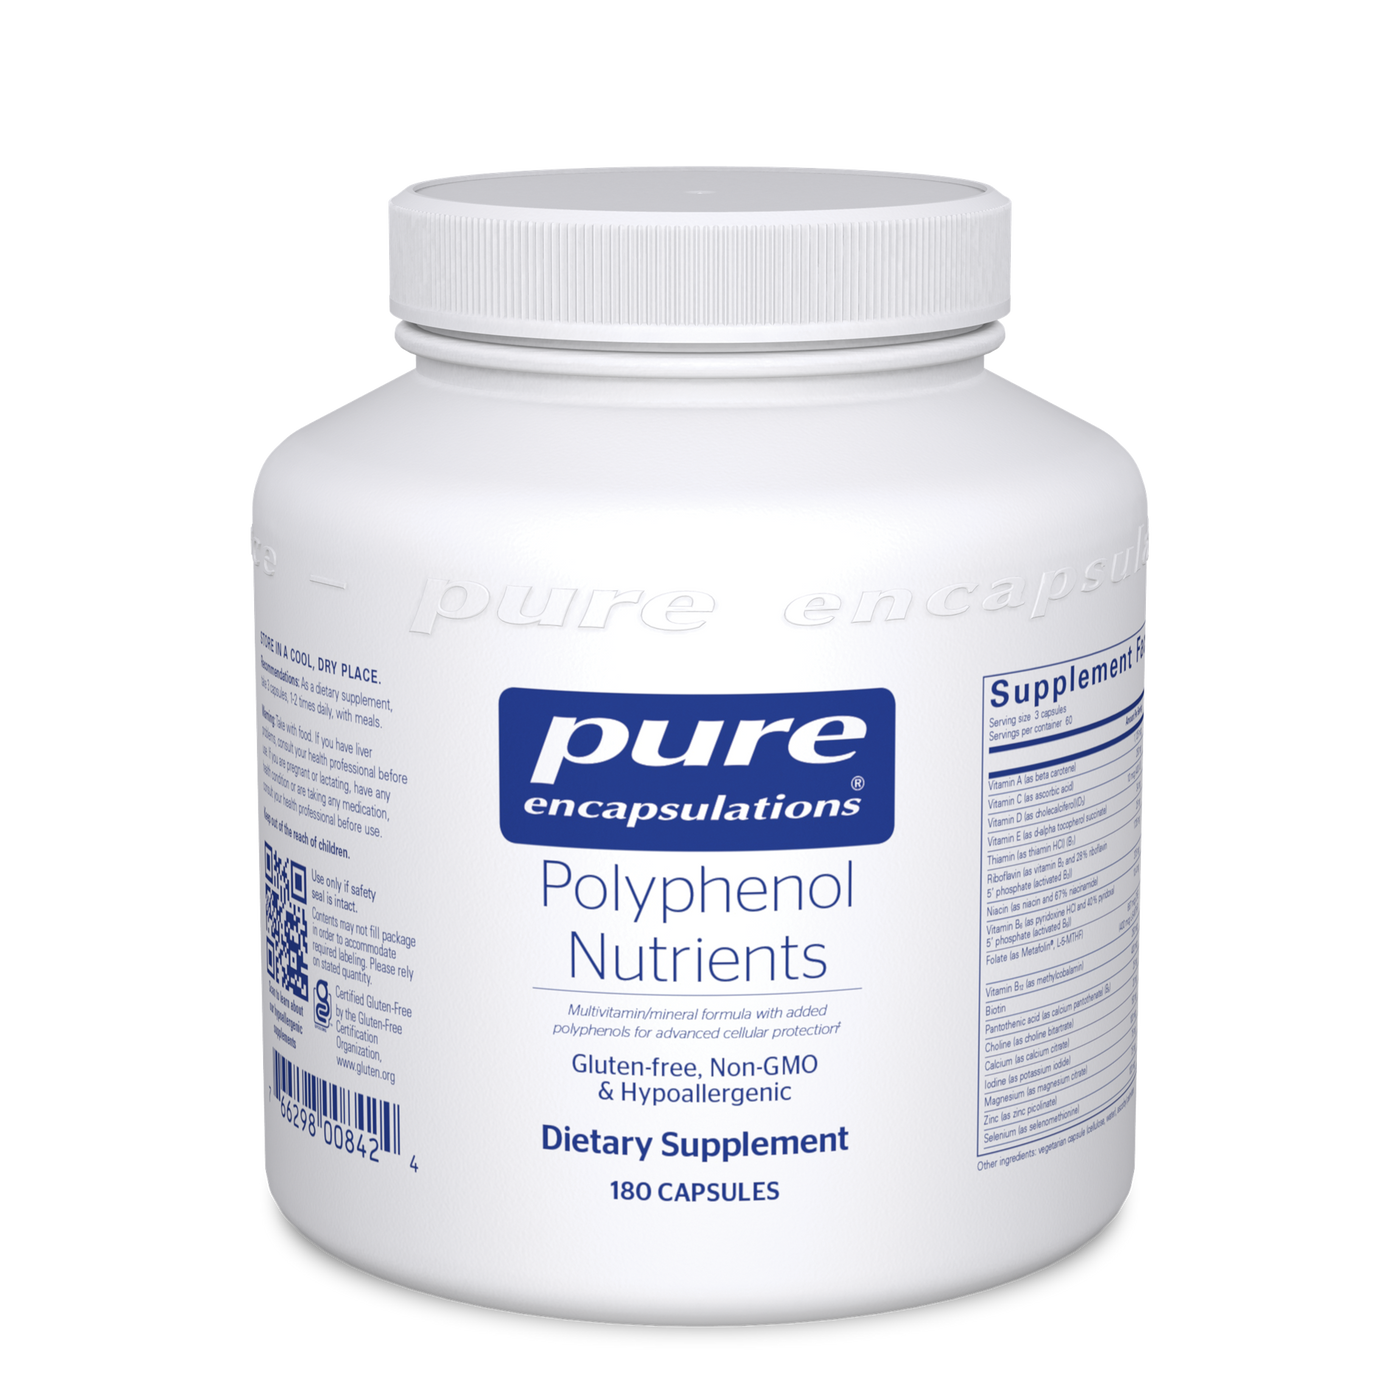 Polyphenol Nutrients 180 vcaps Curated Wellness